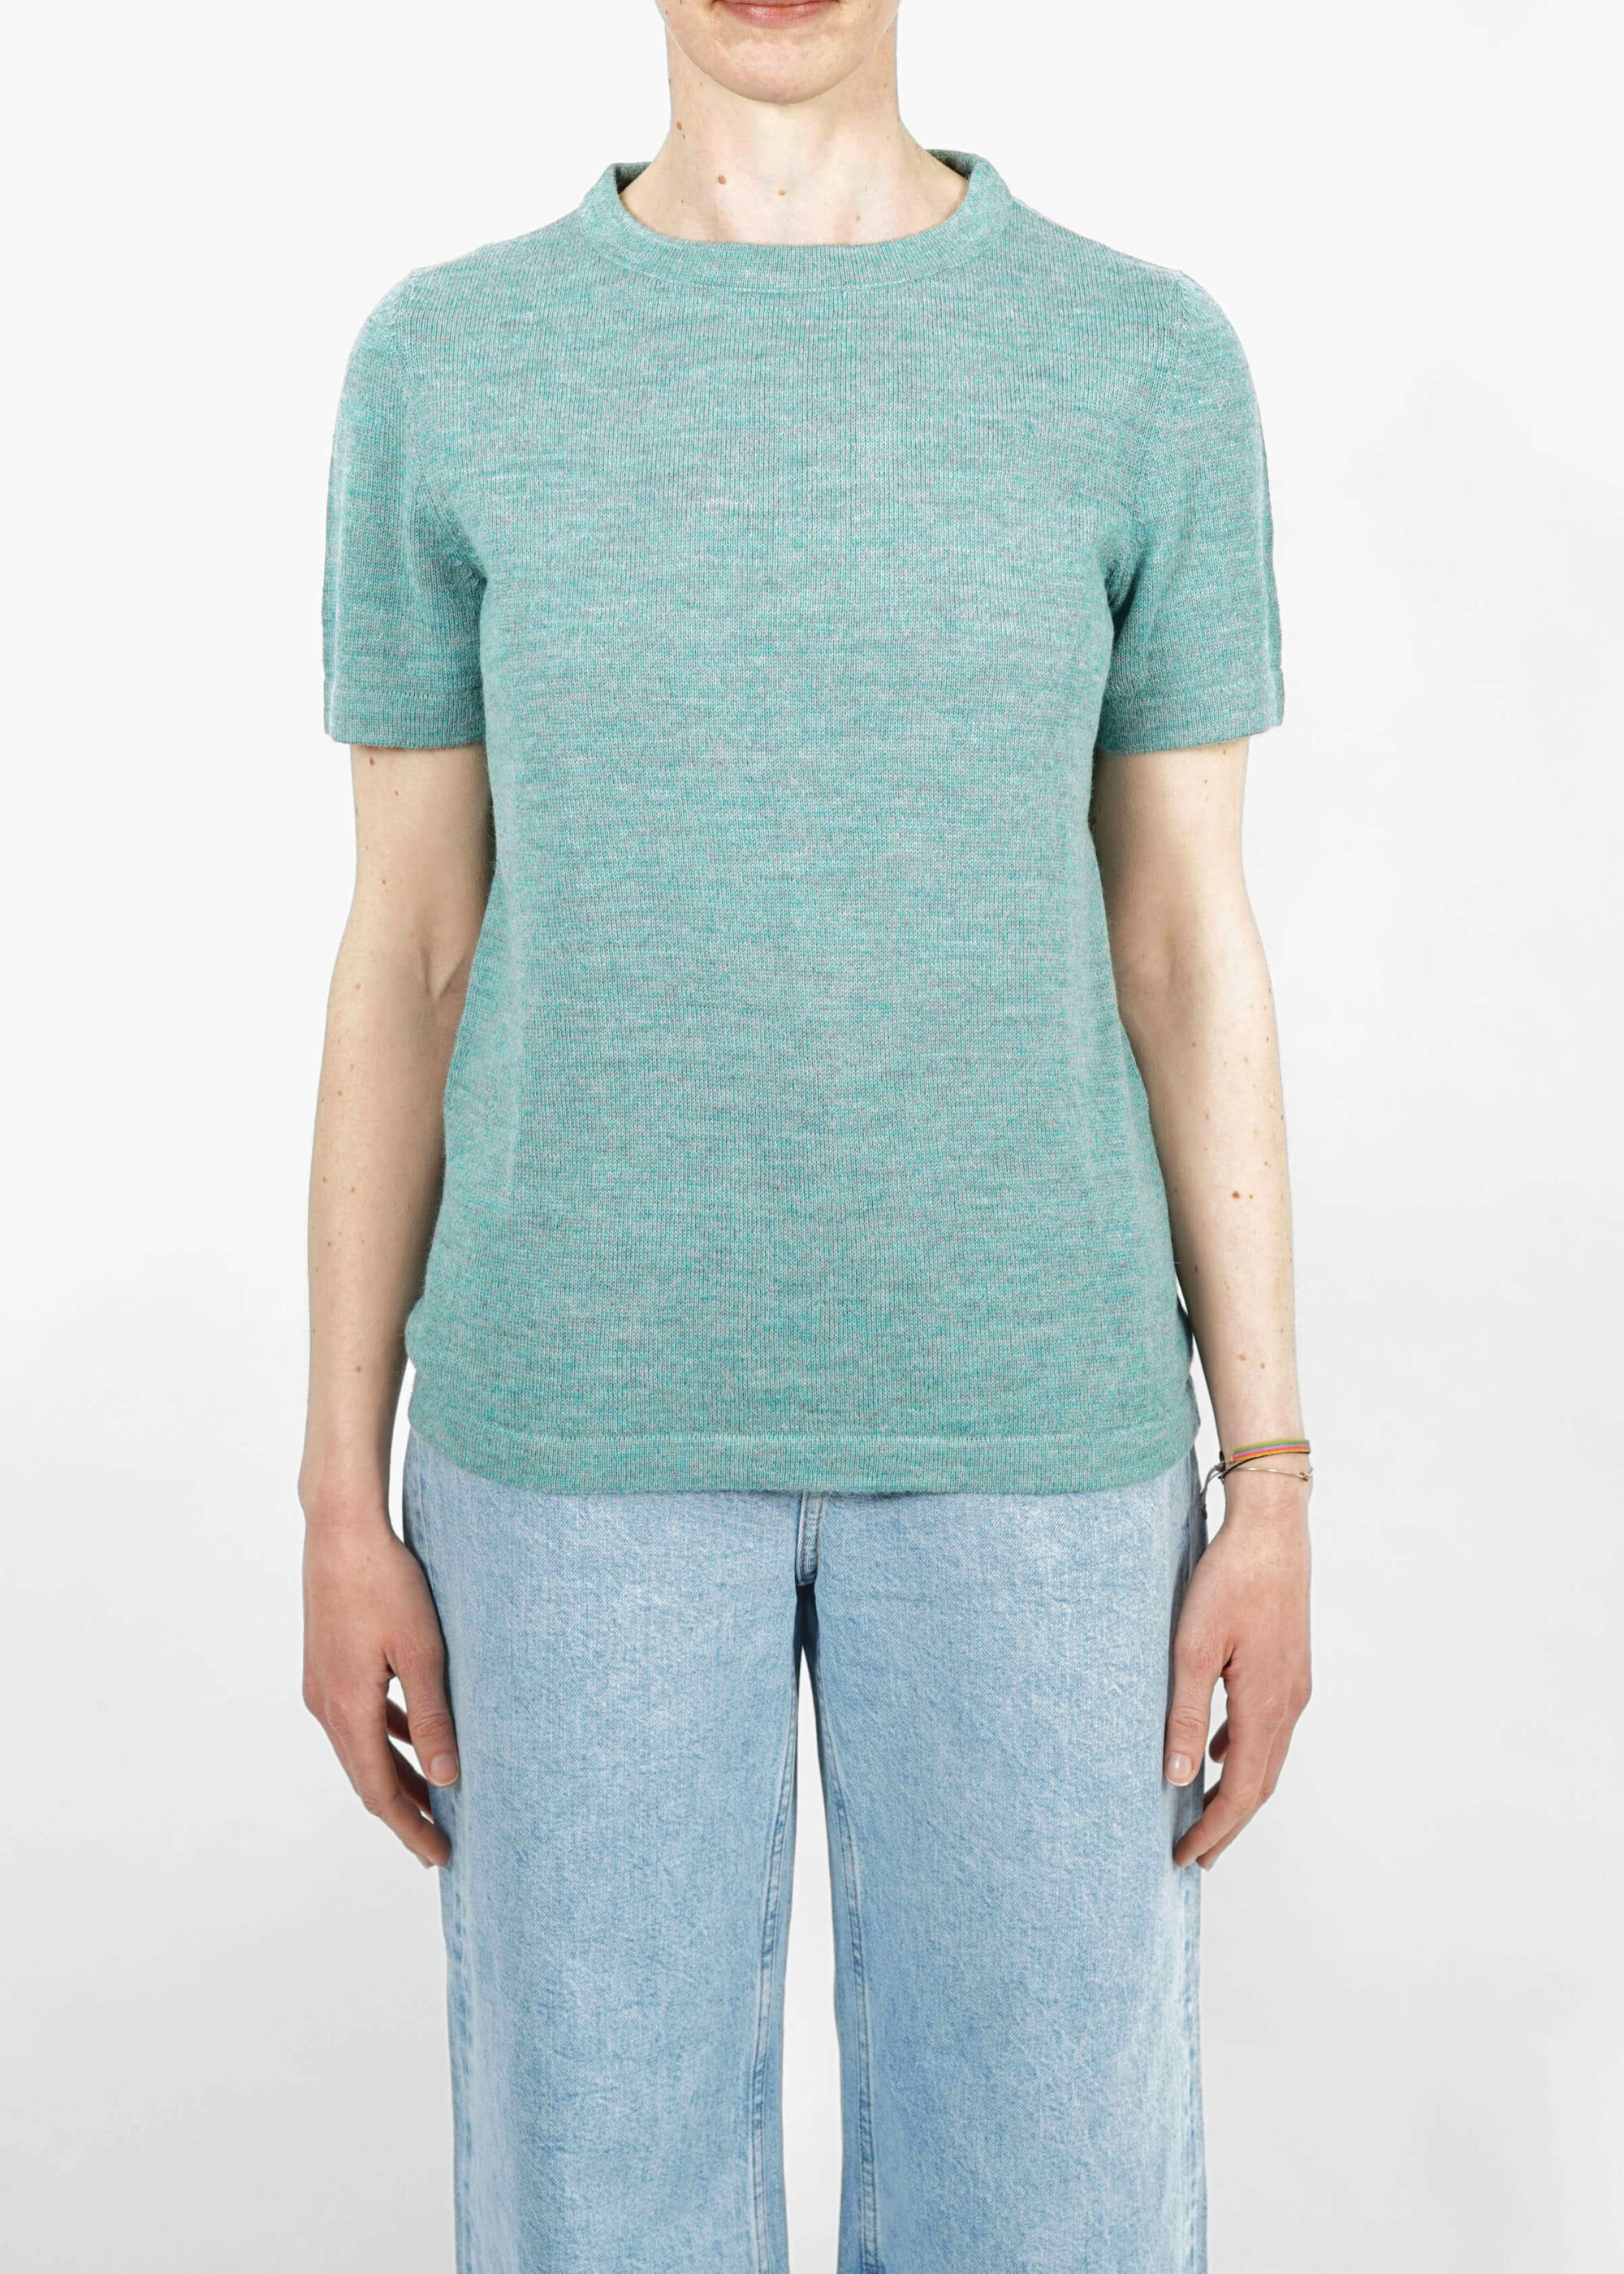 Product image for »Aqua« Turquoise Short-Sleeve Knit Top Baby Alpaca